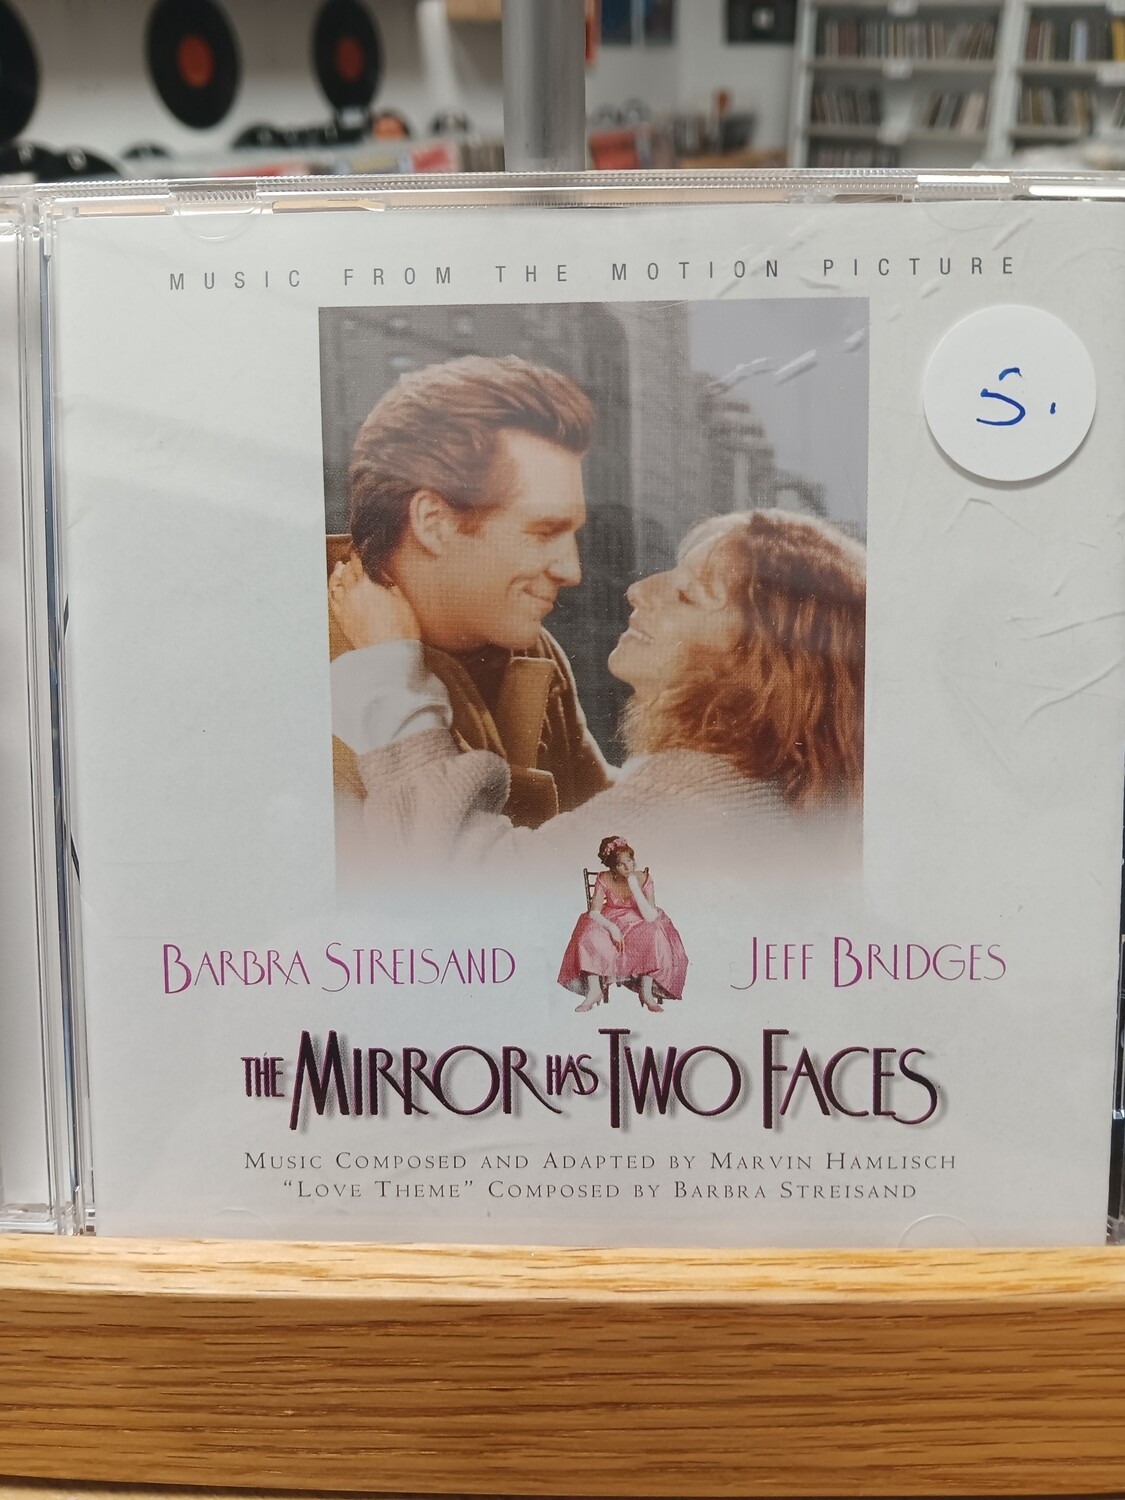 VARIOUS - The mirror has two faces (CD)